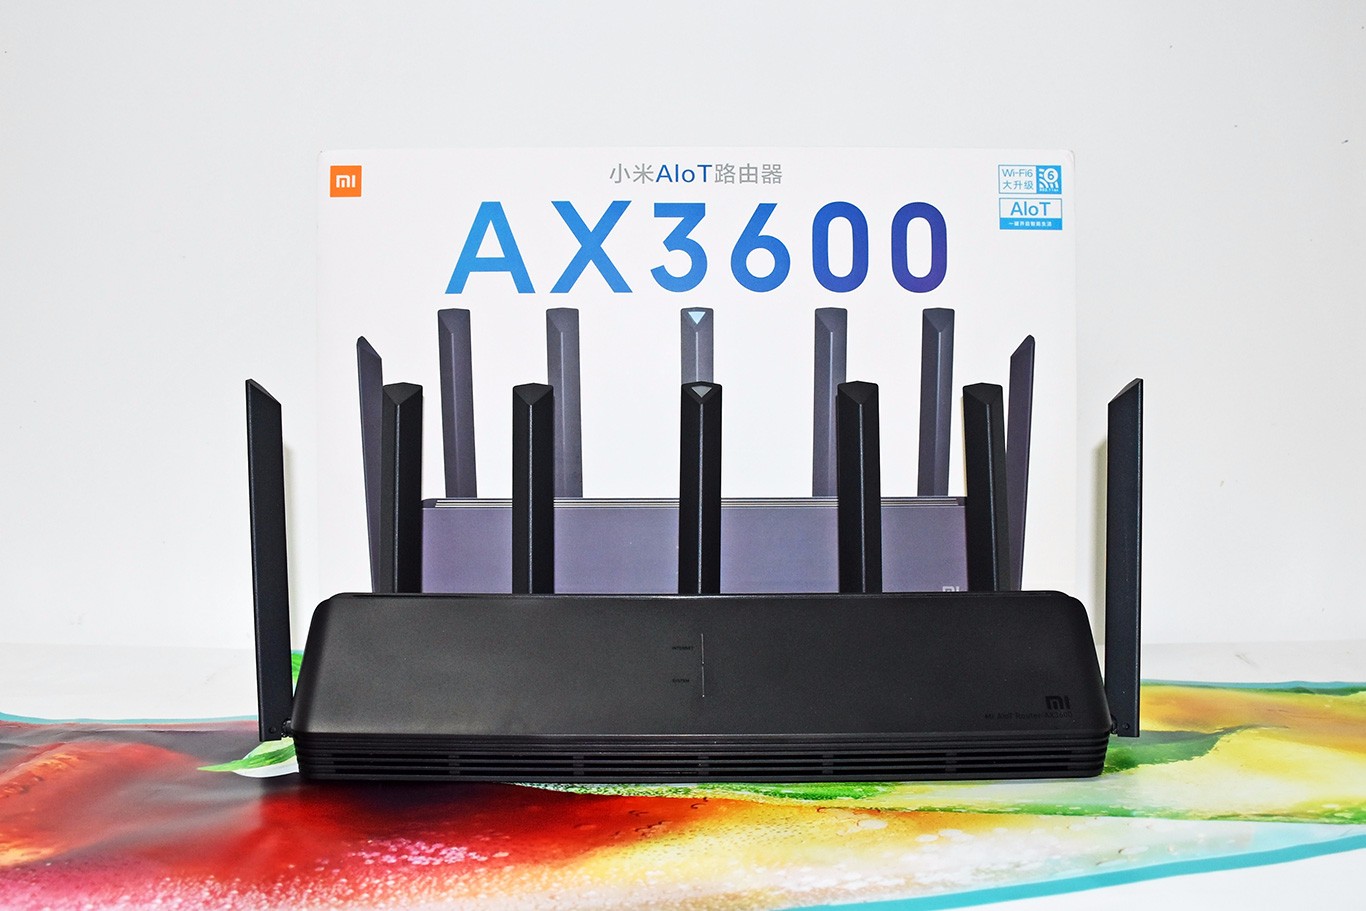 Employer inch rainfall Xiaomi AIoT router AX3600 Review - The Most Affordable WiFi 6 Router?